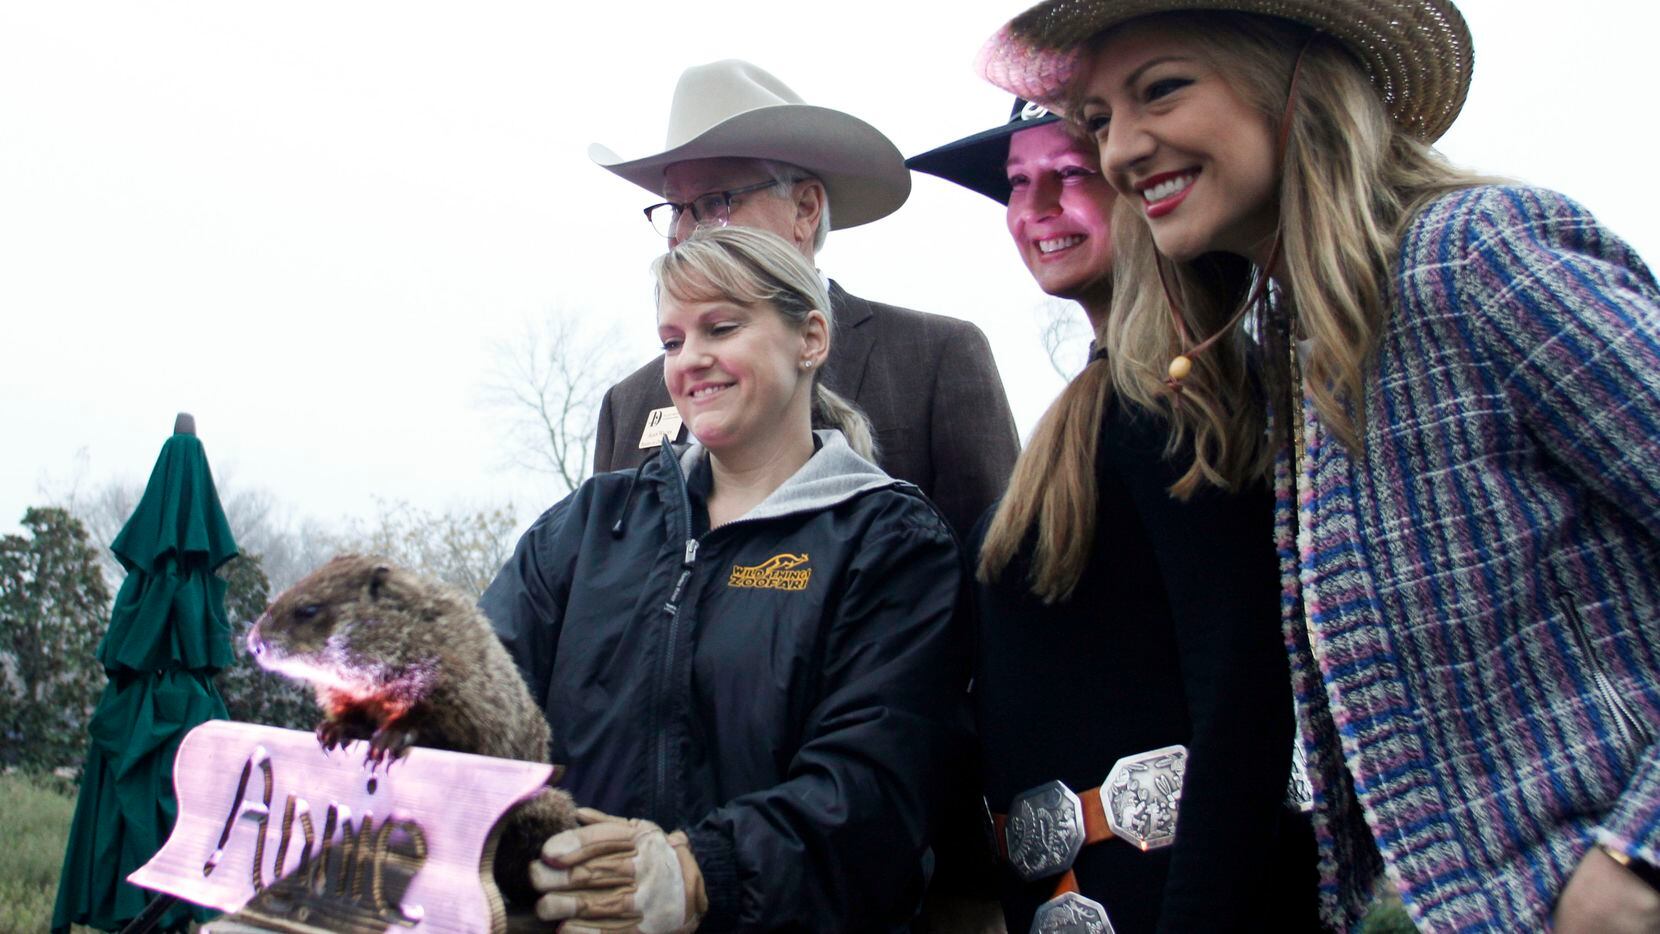 Annie the groundhog emerged at the Dallas Arboretum on  Feb. 2,  without seeing her shadow. On hand for the traditional event was (from left): Alan Walne, vice chairman of the arboretum's board of directors; handler Courtney Pineda; Robin Carreker, chairwoman of the arboretum's Public Events Board; and WFAA meteorologist Colleen Coyle. 